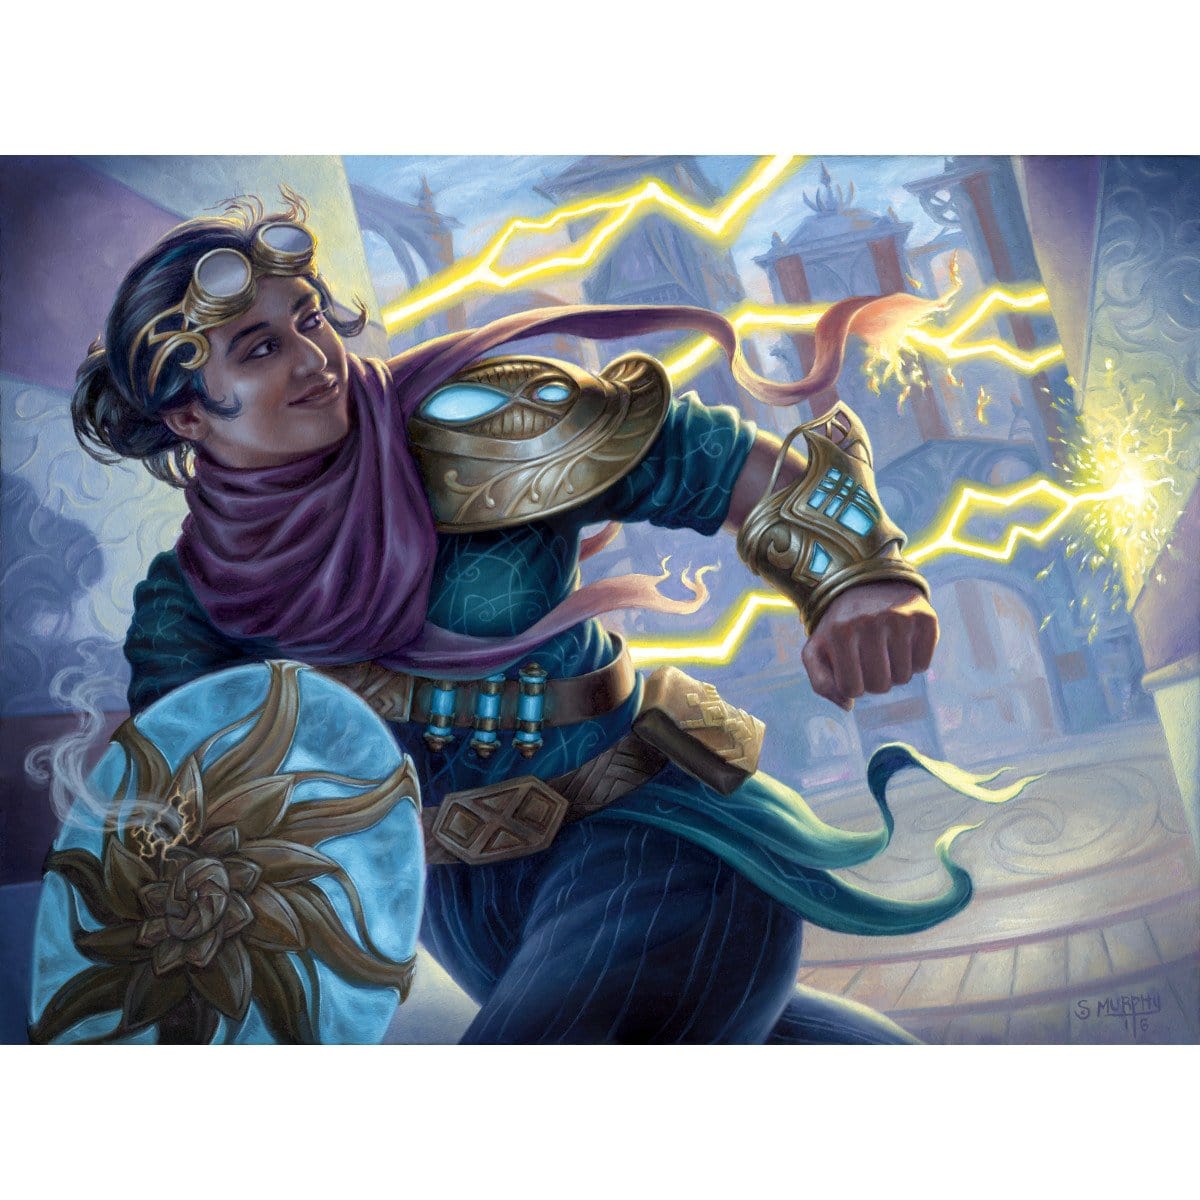 Alley Evasion Print - Print - Original Magic Art - Accessories for Magic the Gathering and other card games